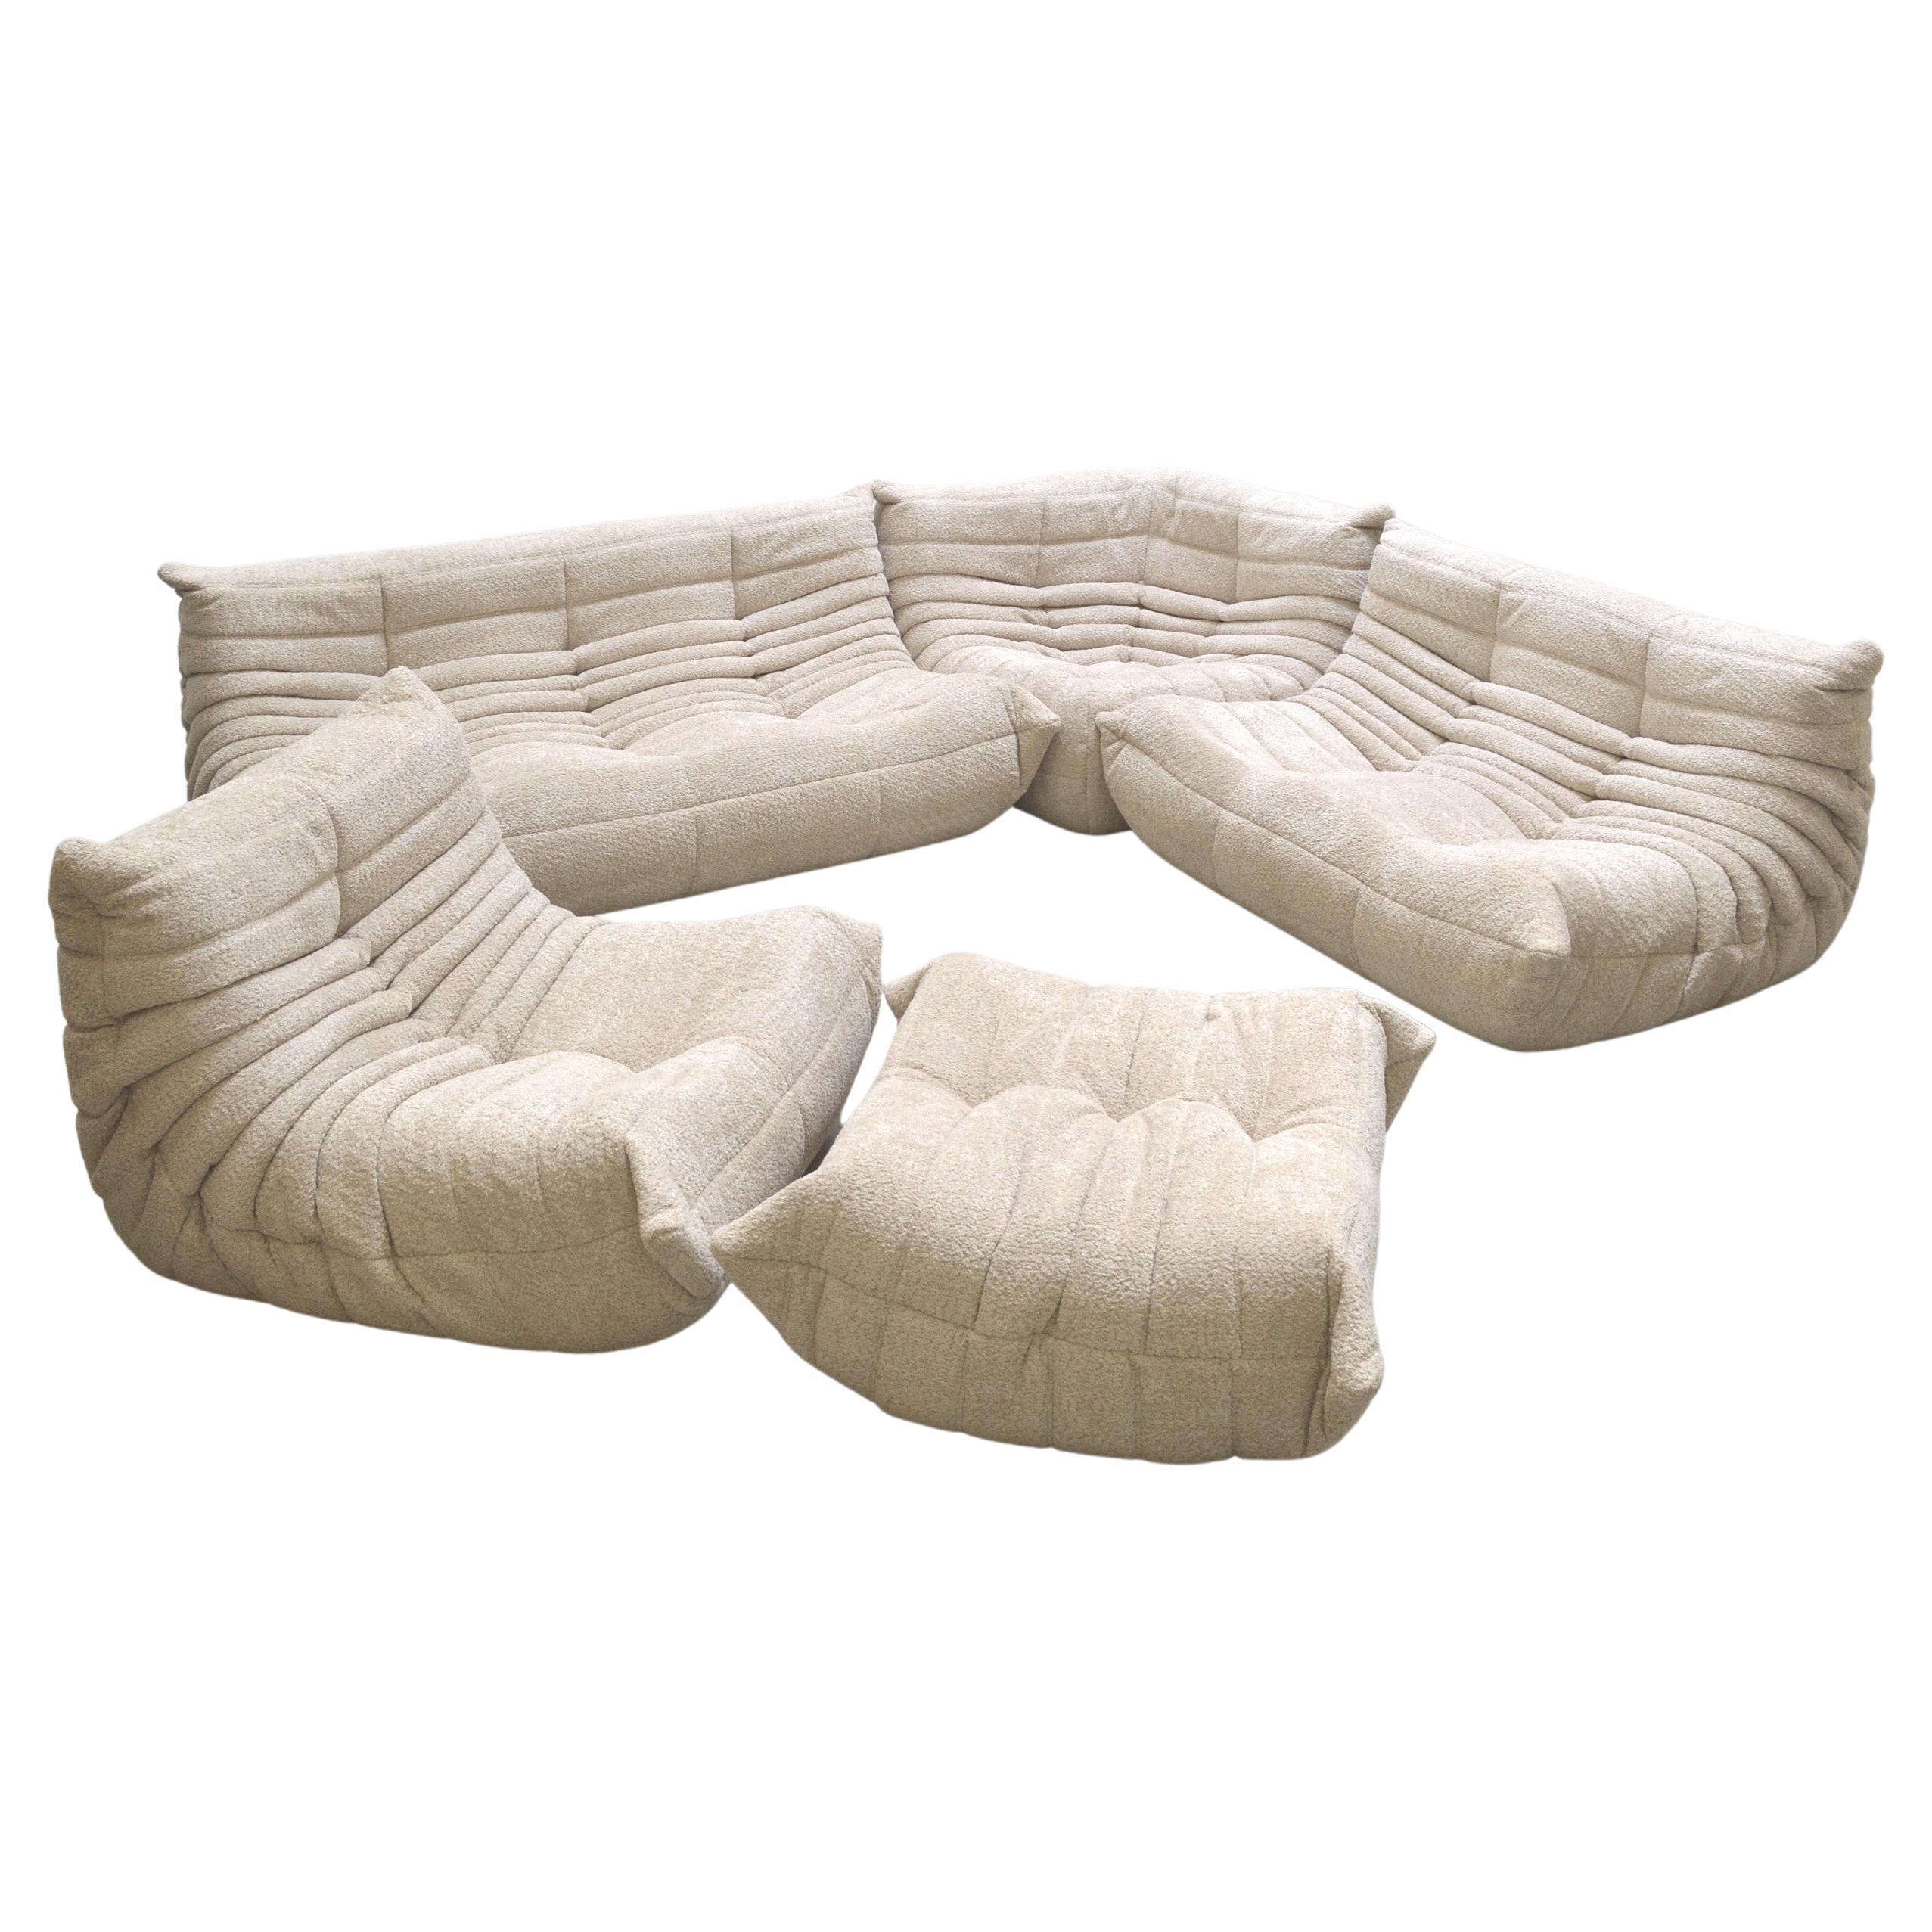 Bouclé Edition Togo Seating Group Sofa by Michel Ducaroy for Ligne Roset 1973